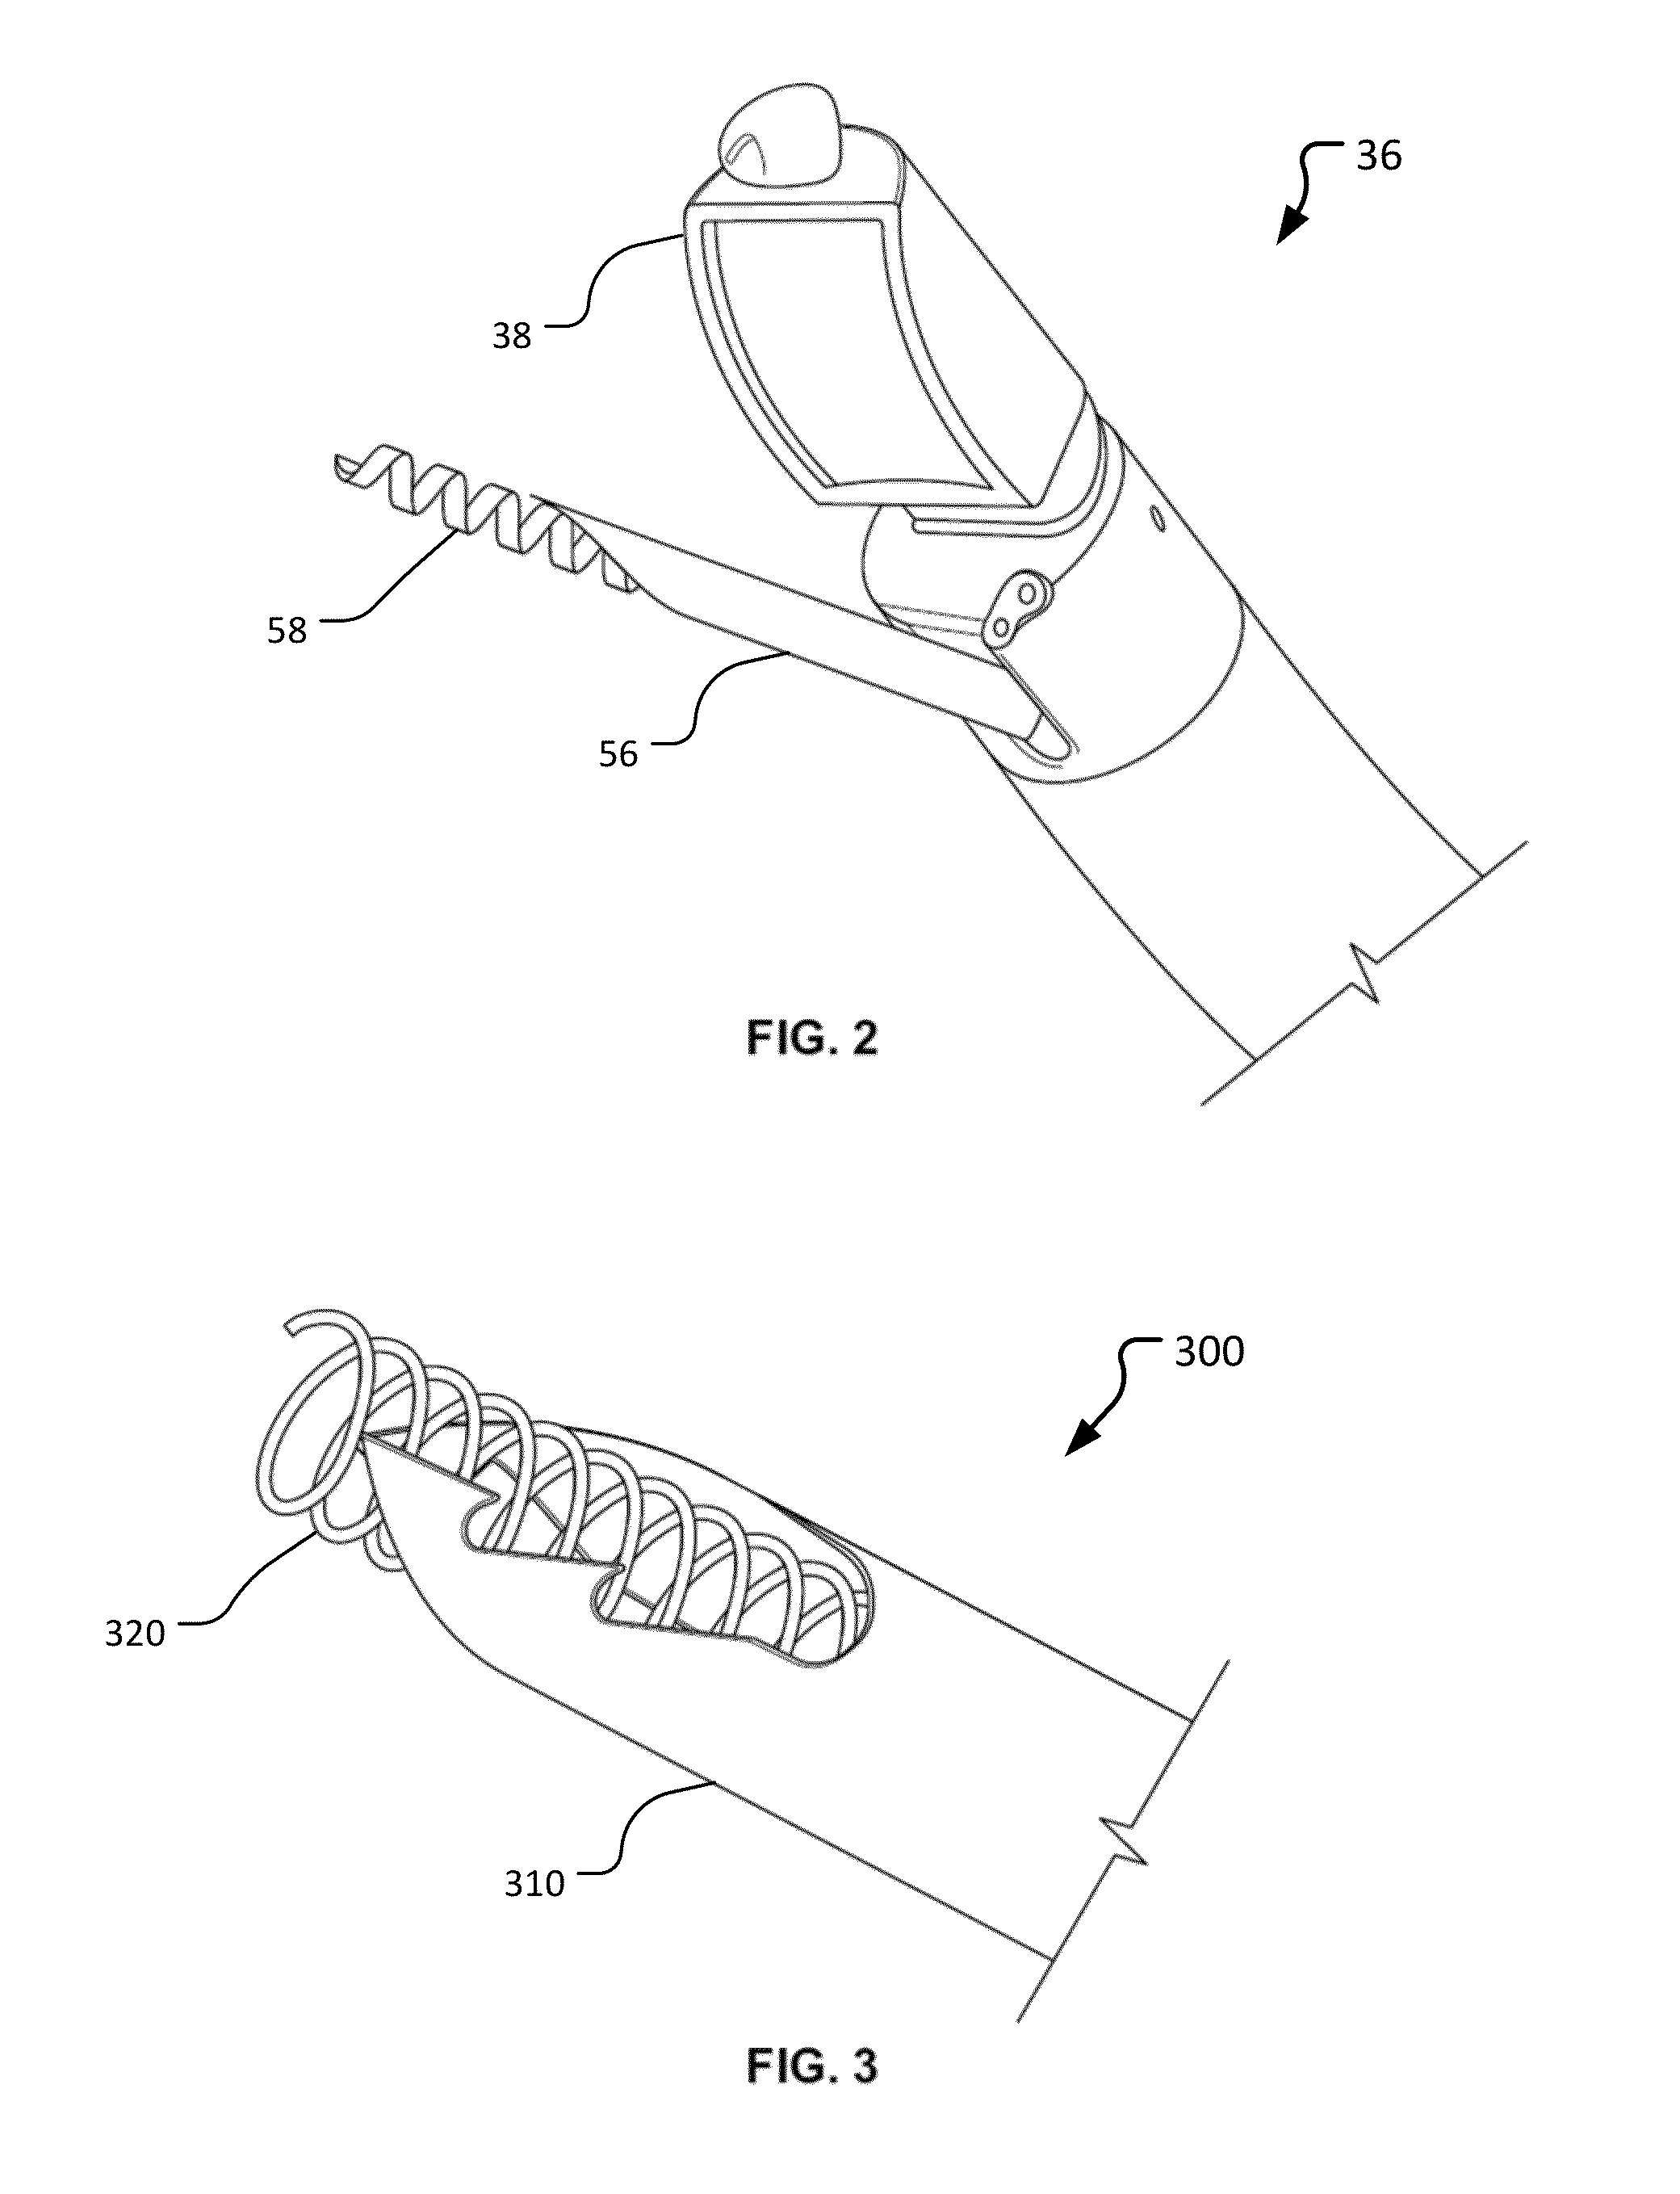 Needle biopsy systems and methods